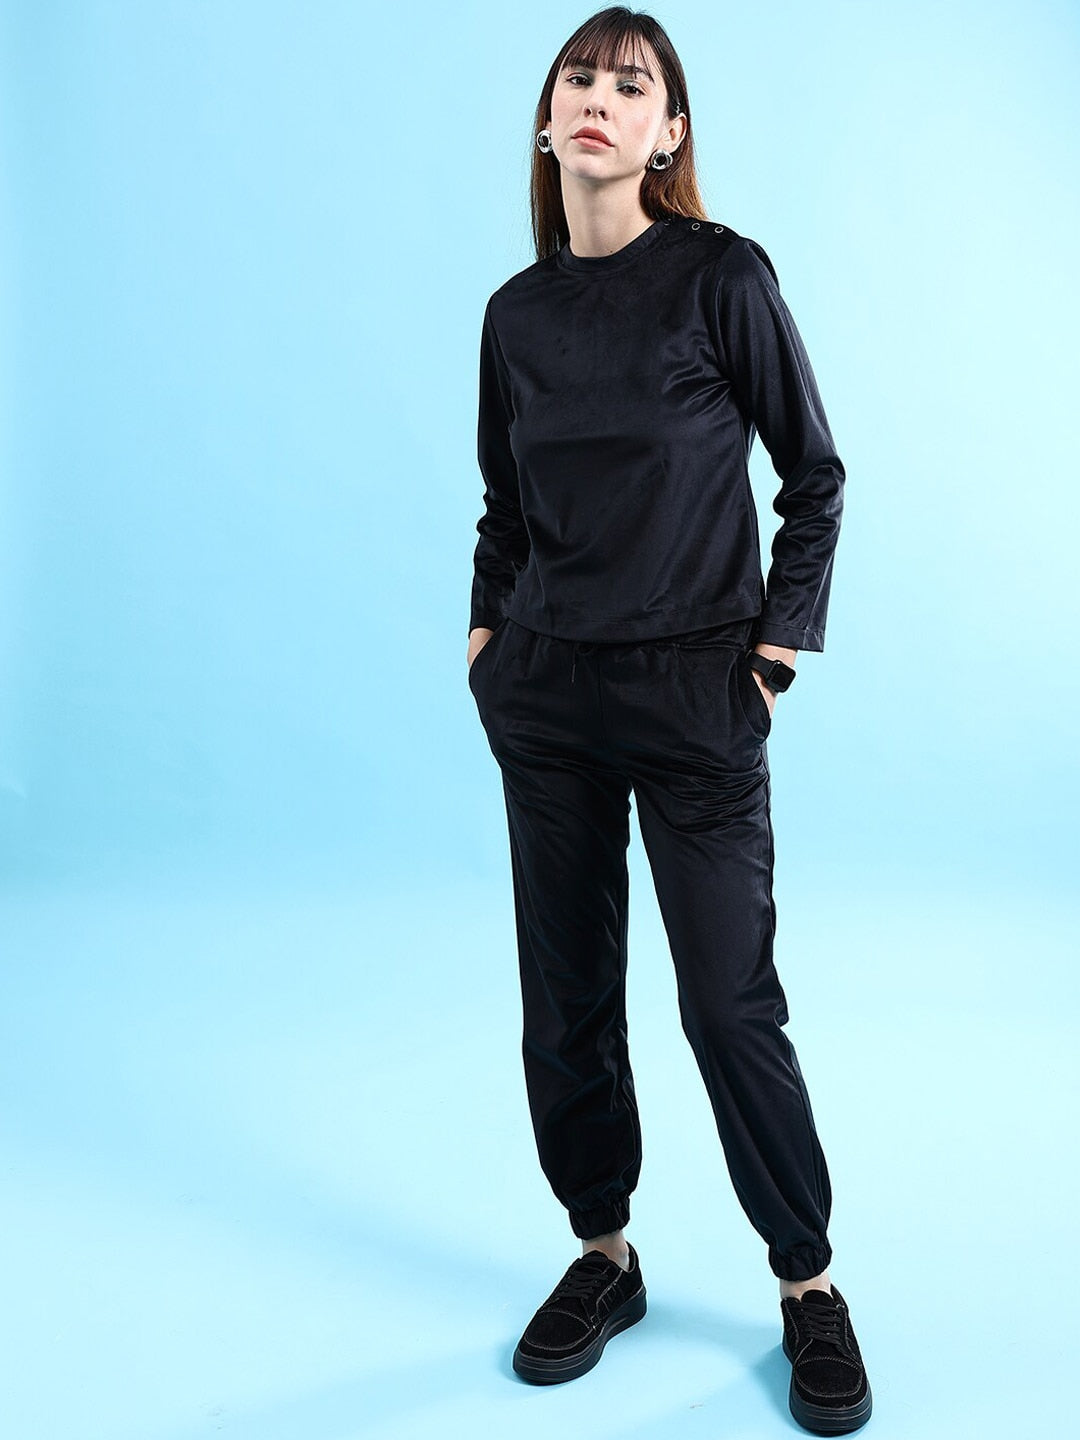 Shop Women Round Neck Top With Pant Set Online.